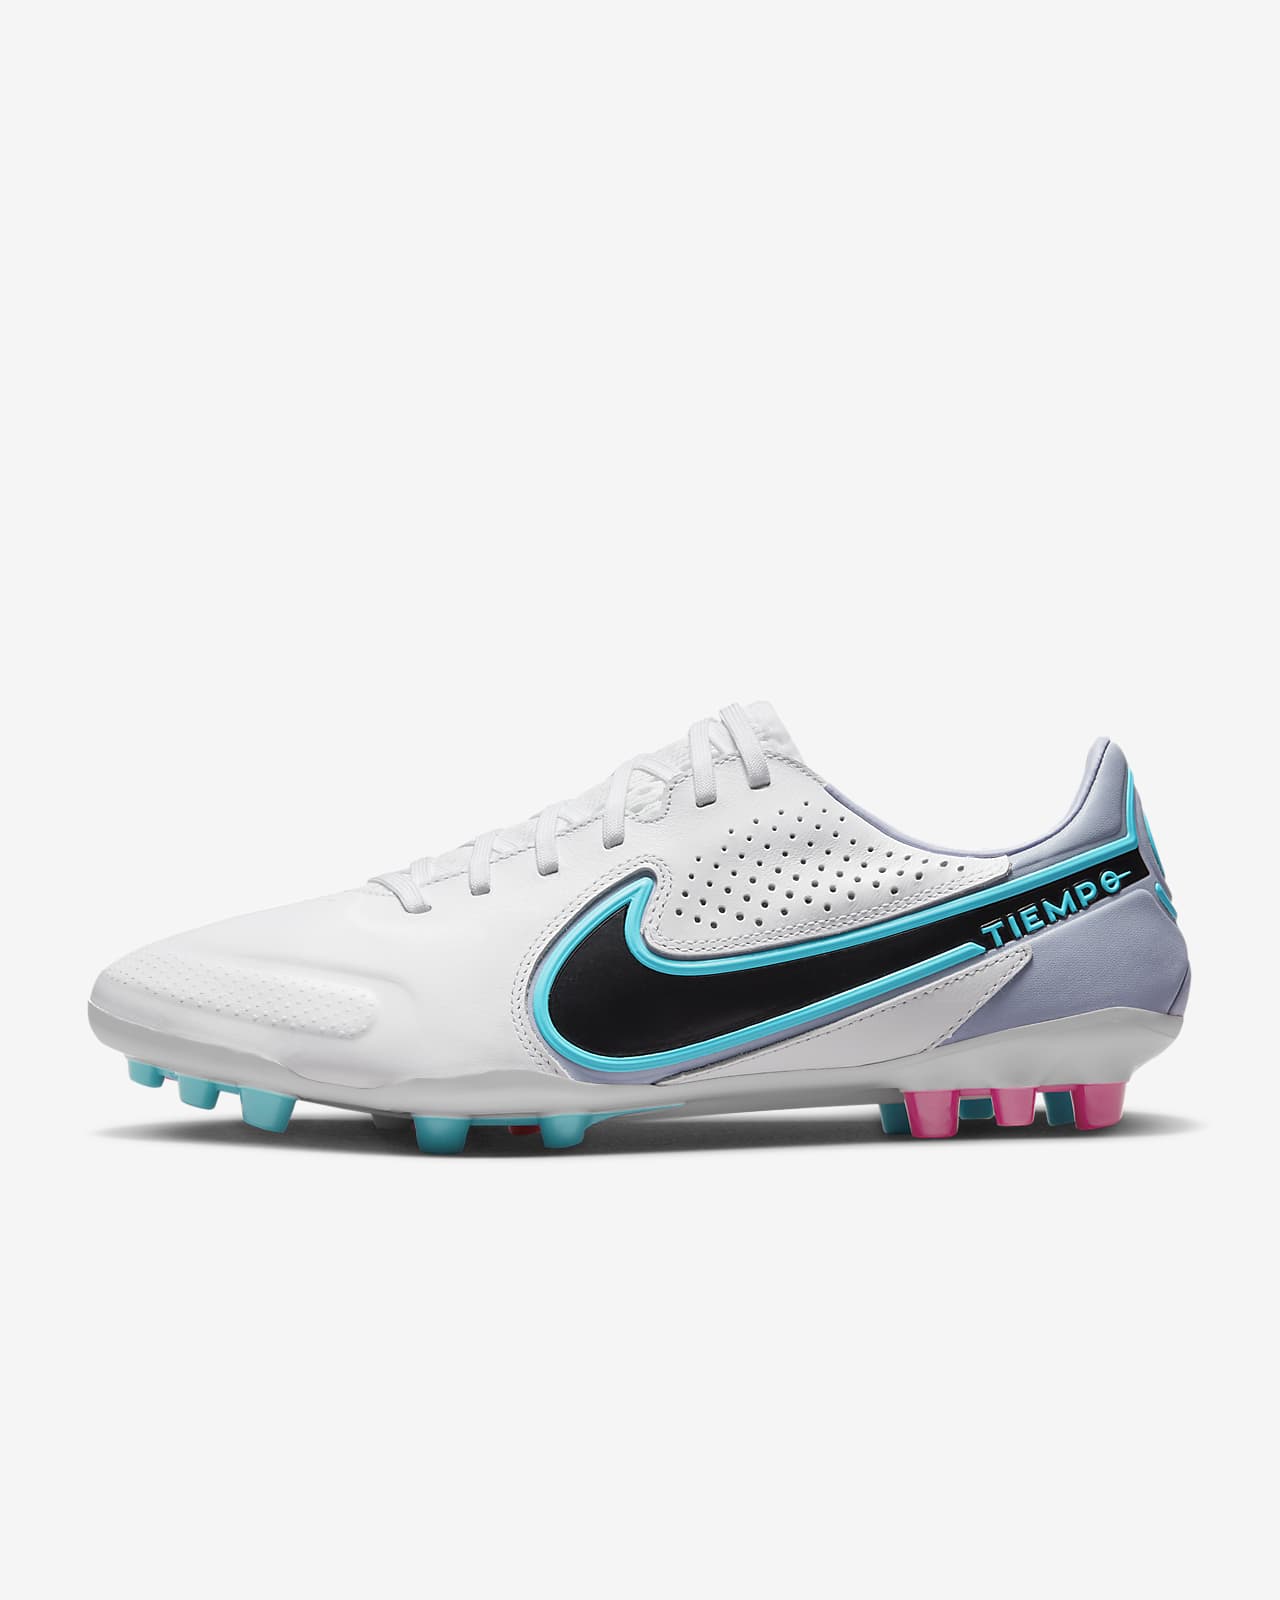 Nike Tiempo Legend 9 Pro AG-Pro Artificial-Ground Football Boot